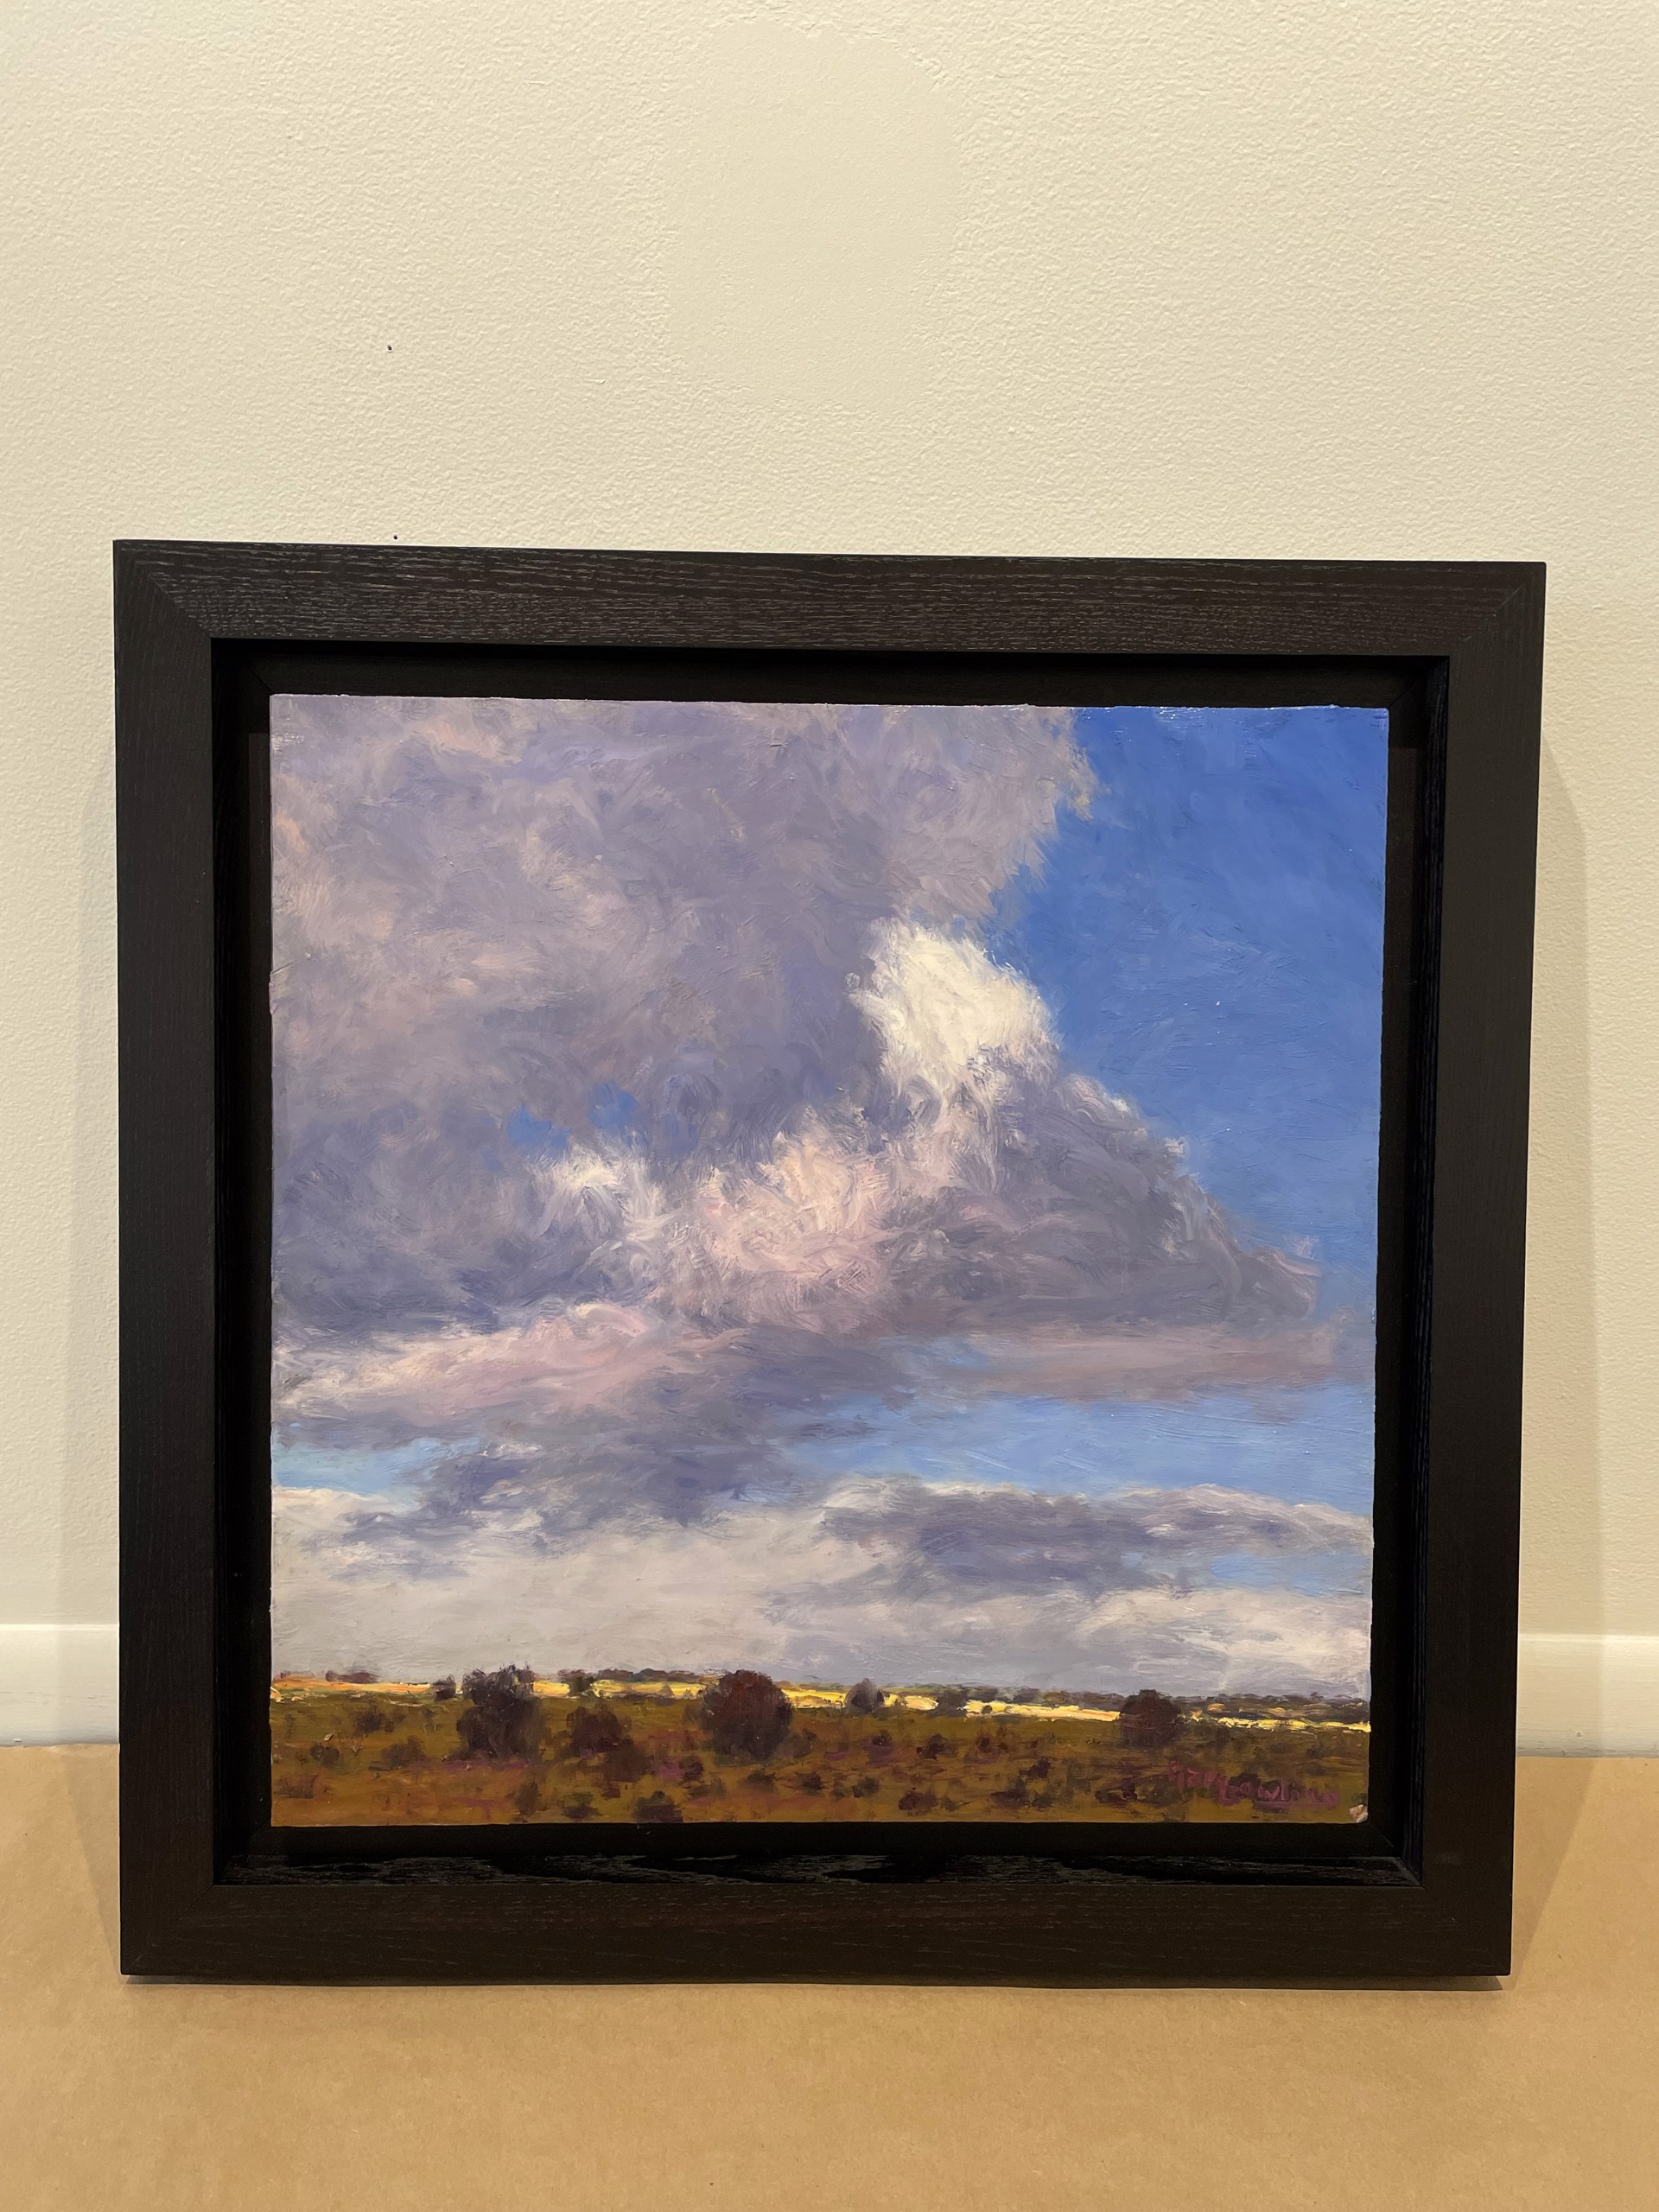 Desert Grasslands with Passing Clouds 2 by Gary Bowling